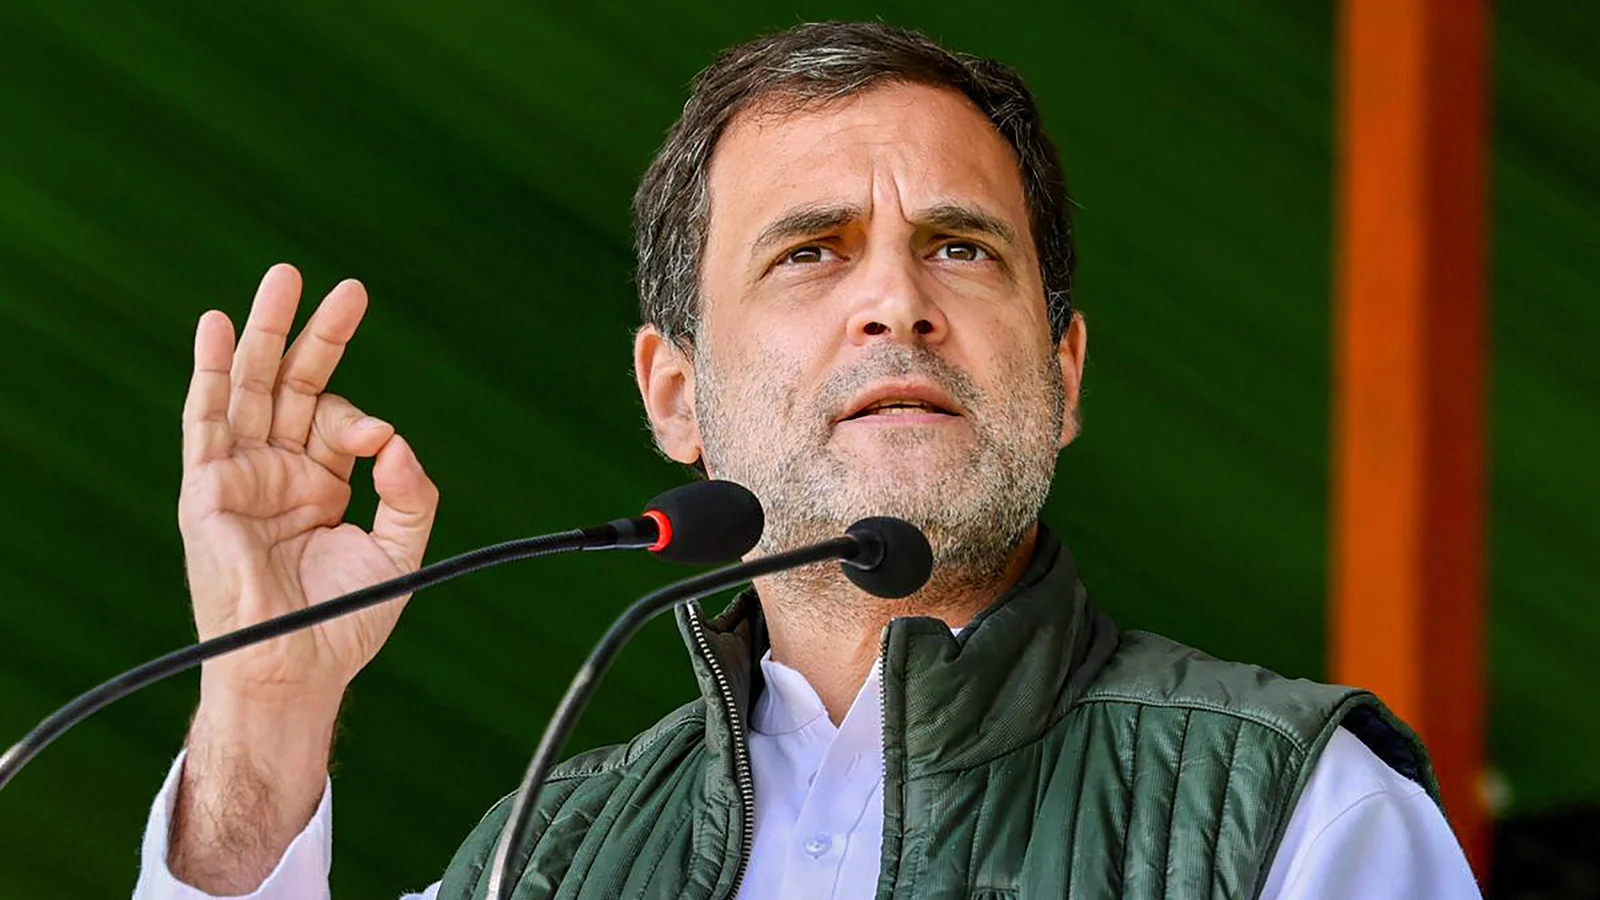 Morning brief: Rahul Gandhi to campaign in Amethi, Prayagraj today, and all the latest news